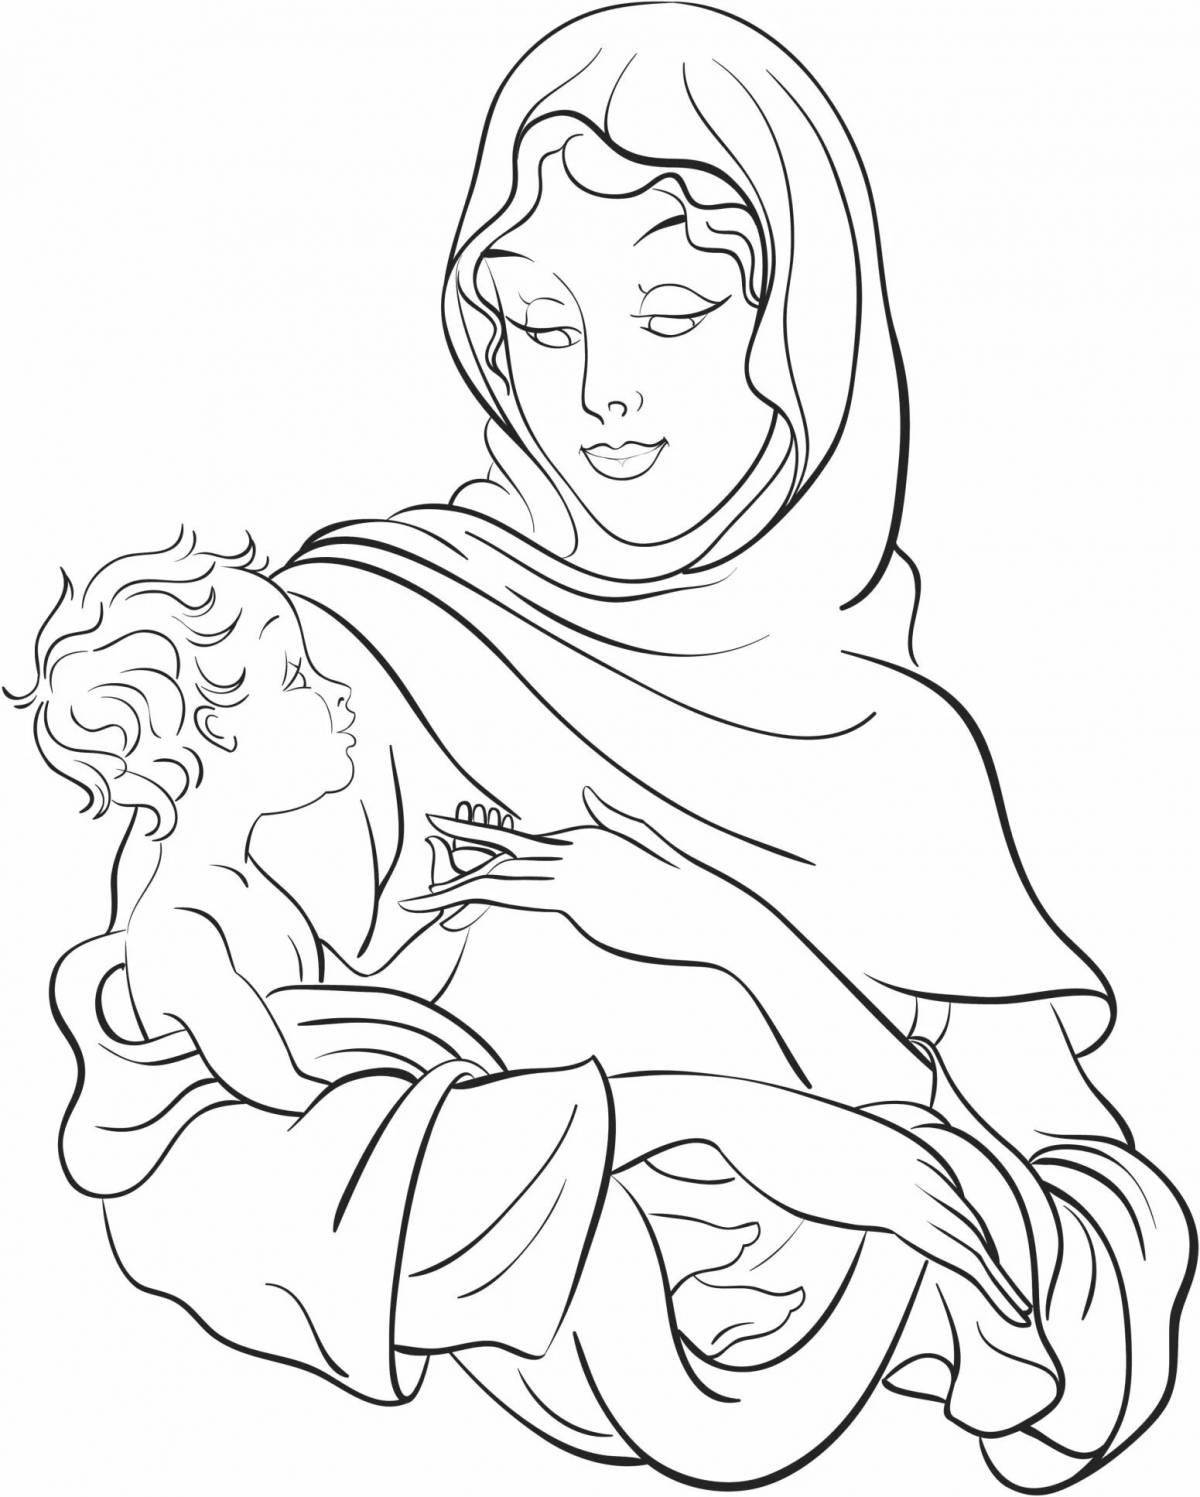 Glorious coloring of the virgin mary and child